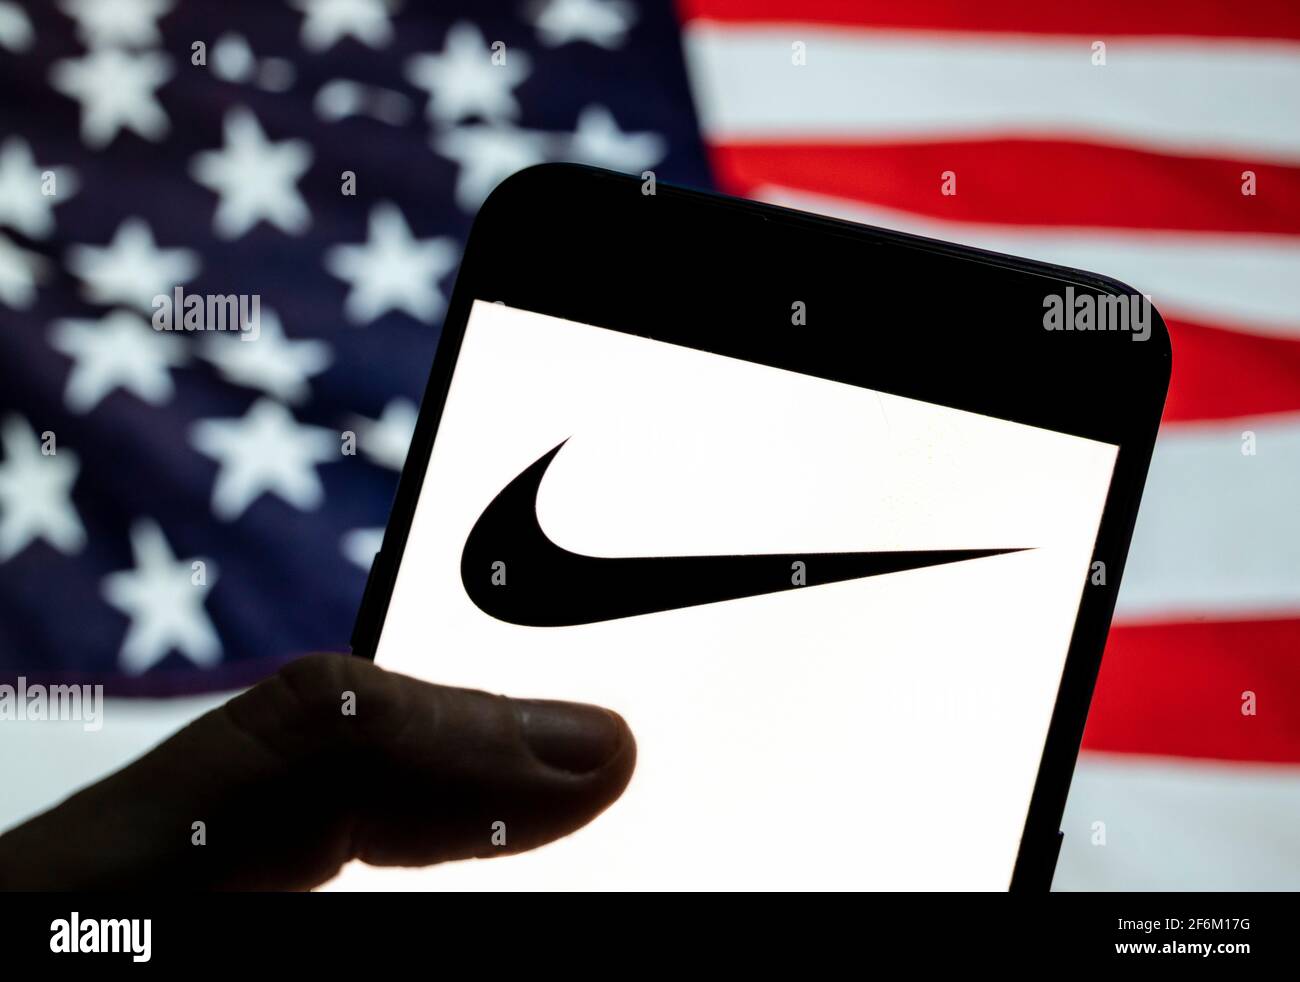 S nike High Resolution Stock Photography and Images - Alamy